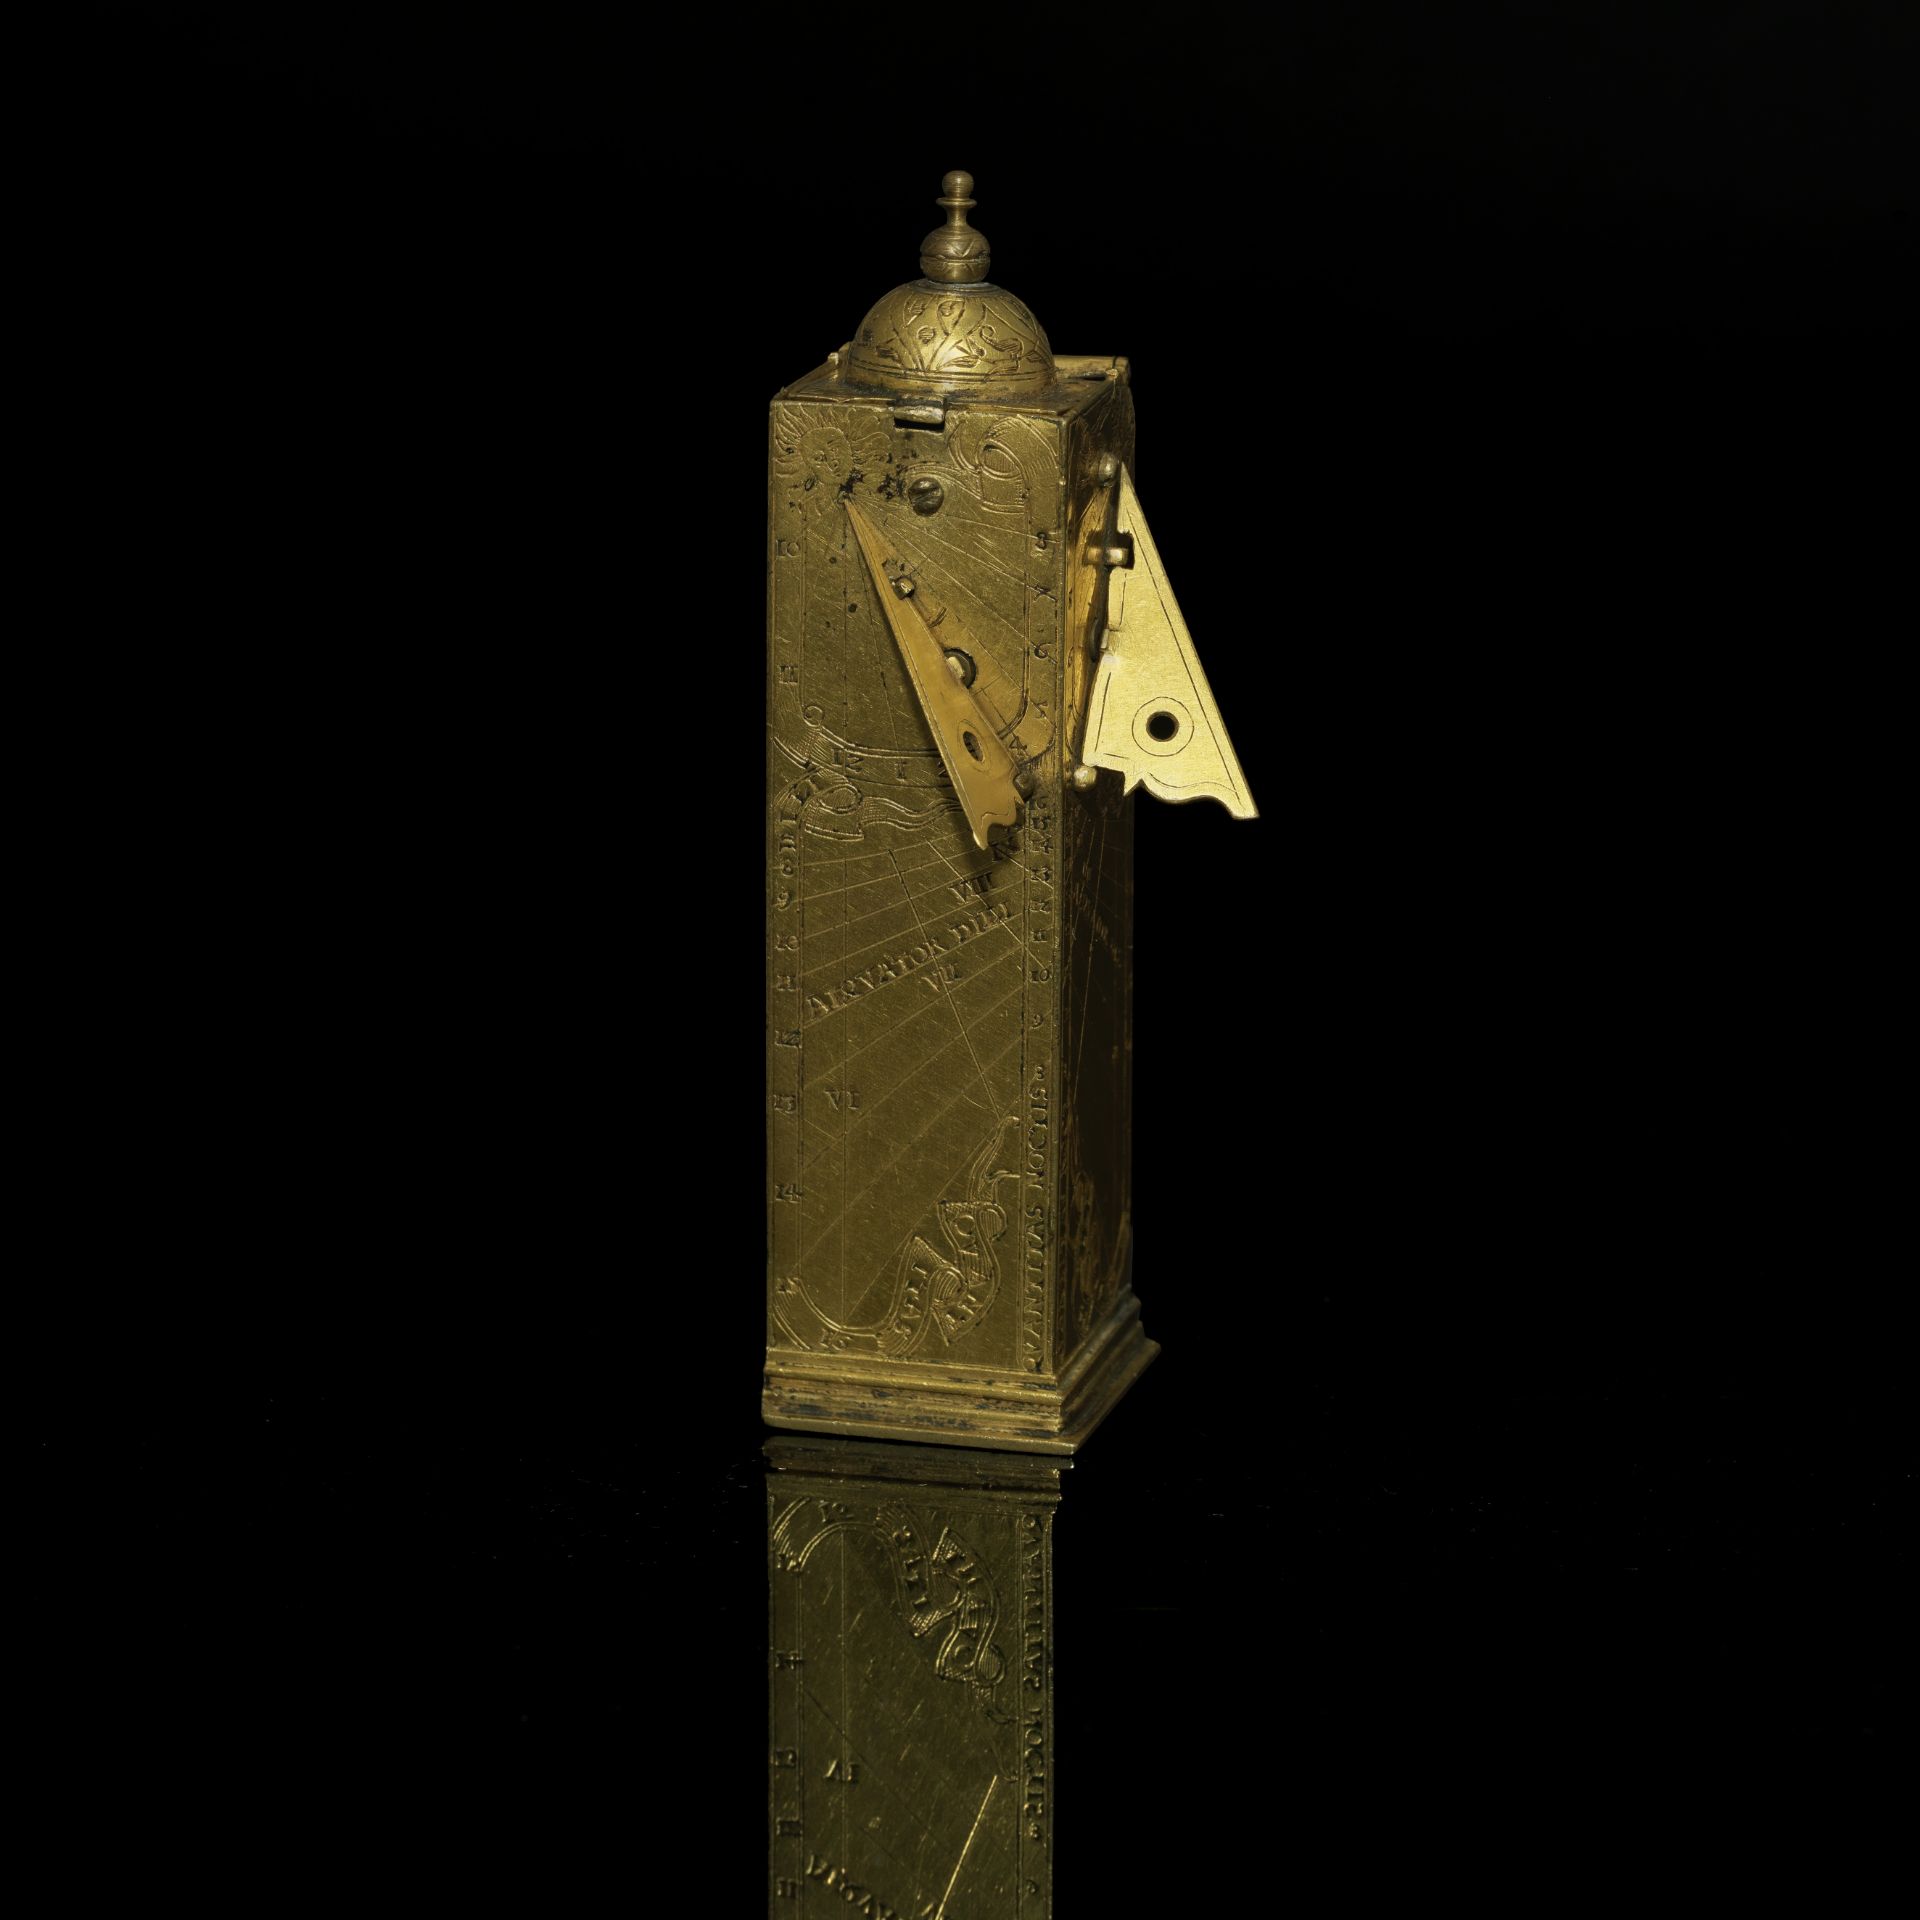 A Rare Gilt Brass Square-Sided Multiple Dial, probably German, late or mid 16th century,